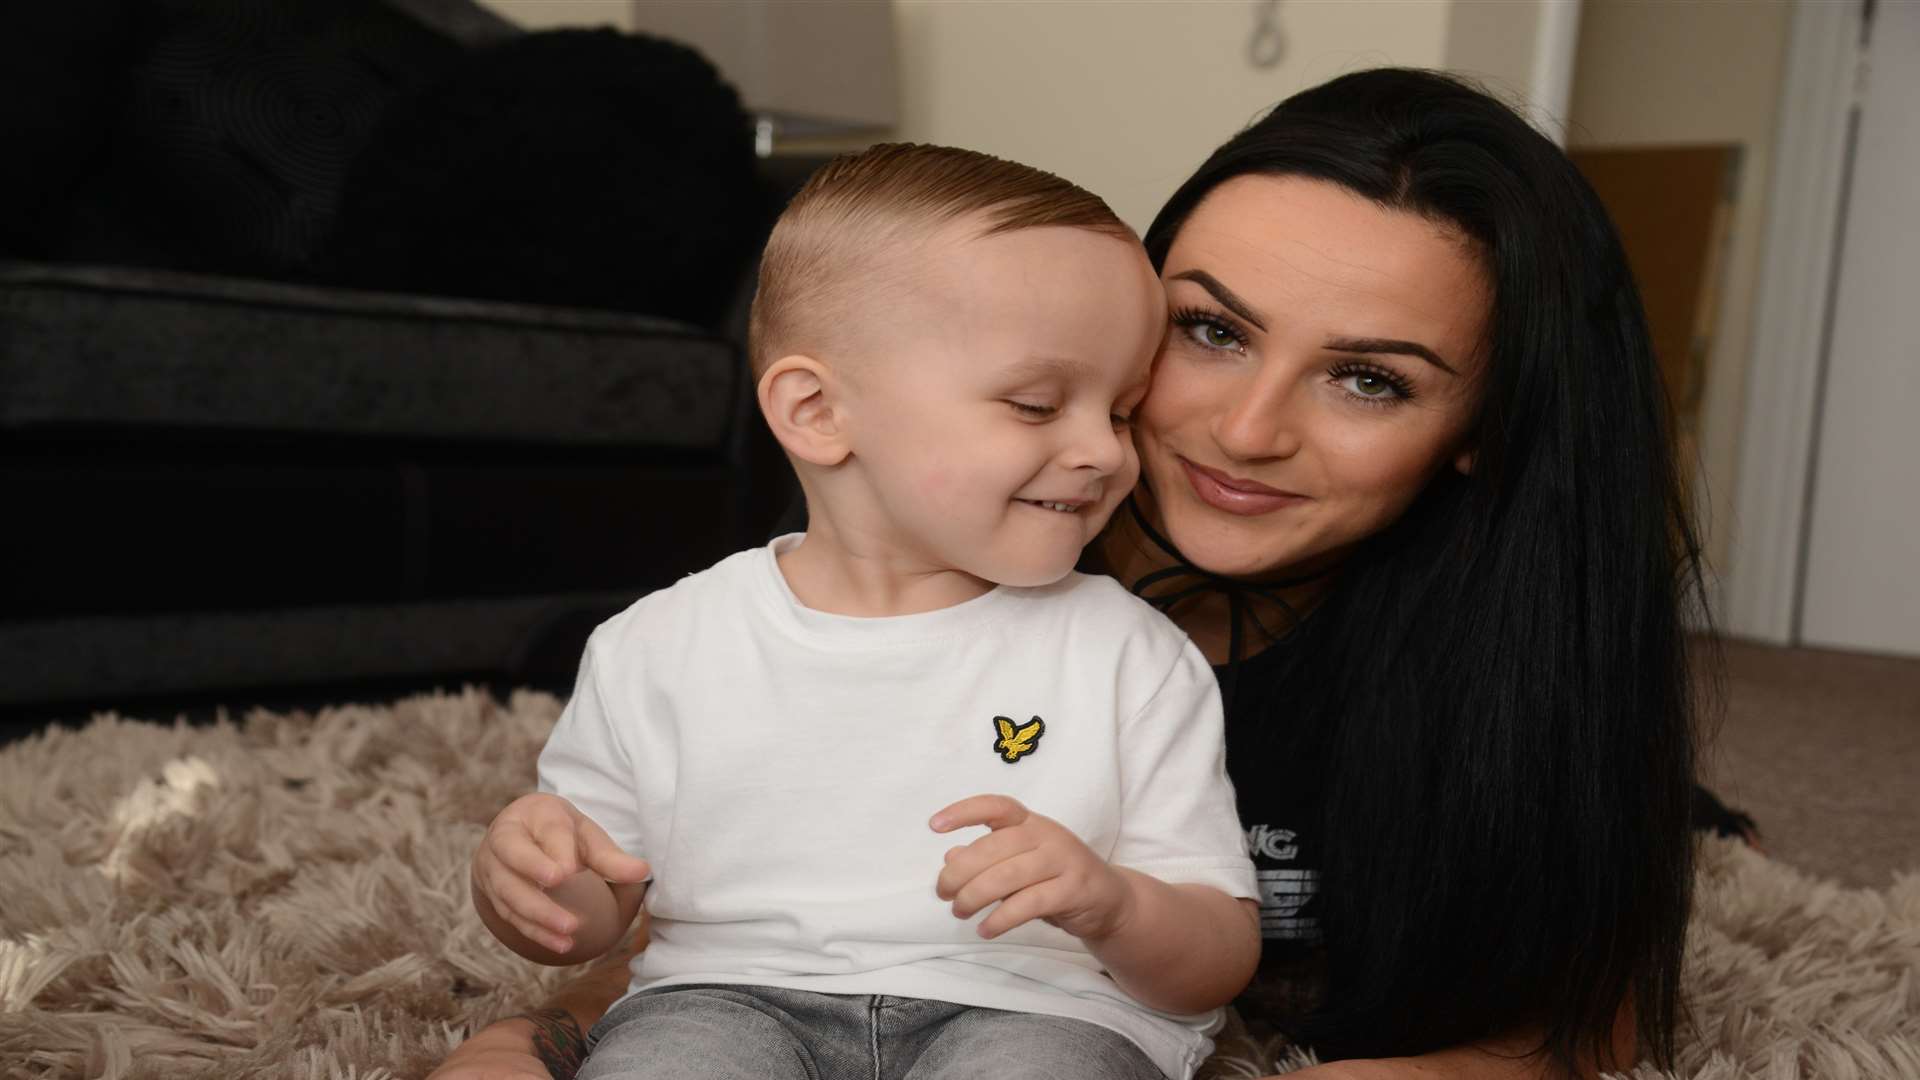 Blind toddler Freddie Penny, two, has reached the target of £25k to pay for life changing eye surgery in Bangkok Pictured with his mum Robyn Gough